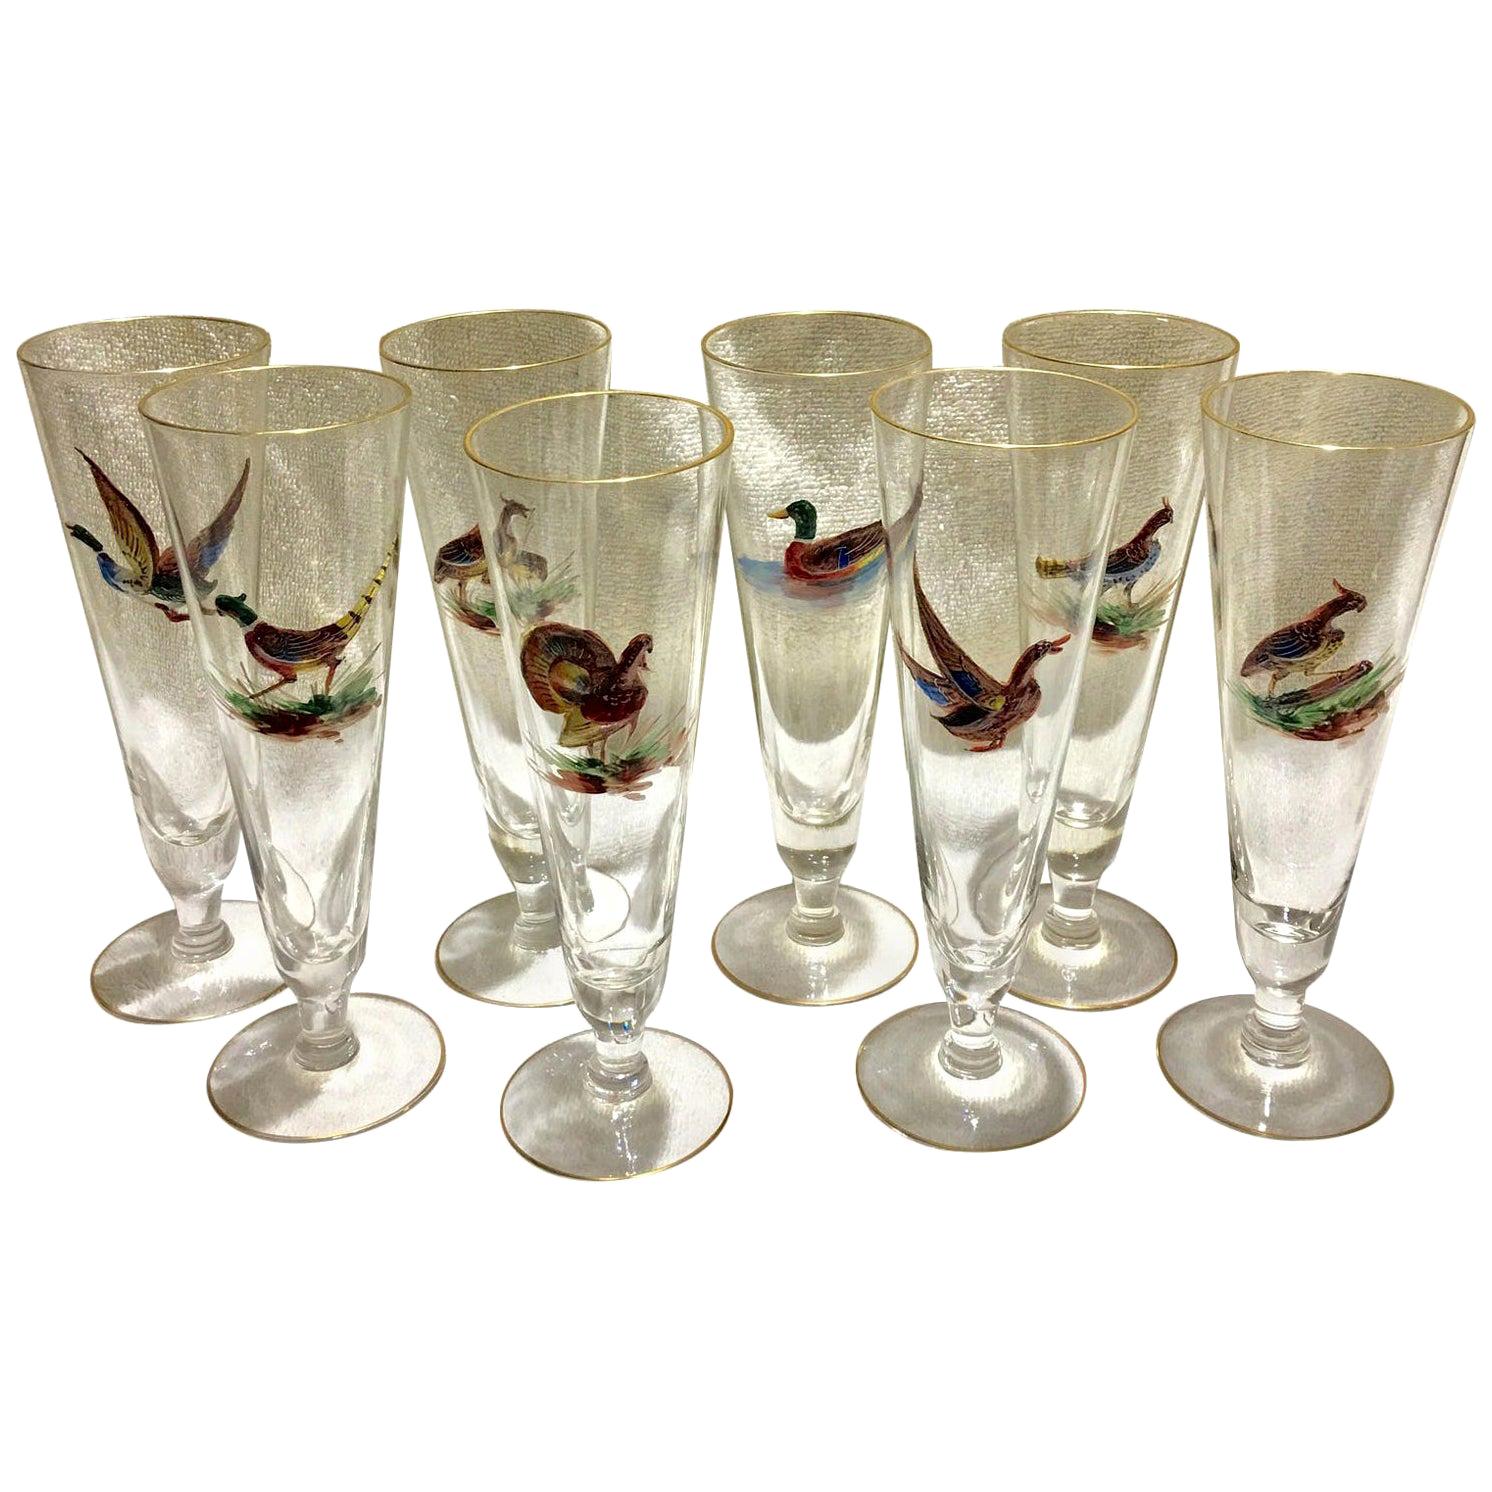 Set of 8 Tall Pilsner Glasses or Champagne Flutes with Enameled Birds